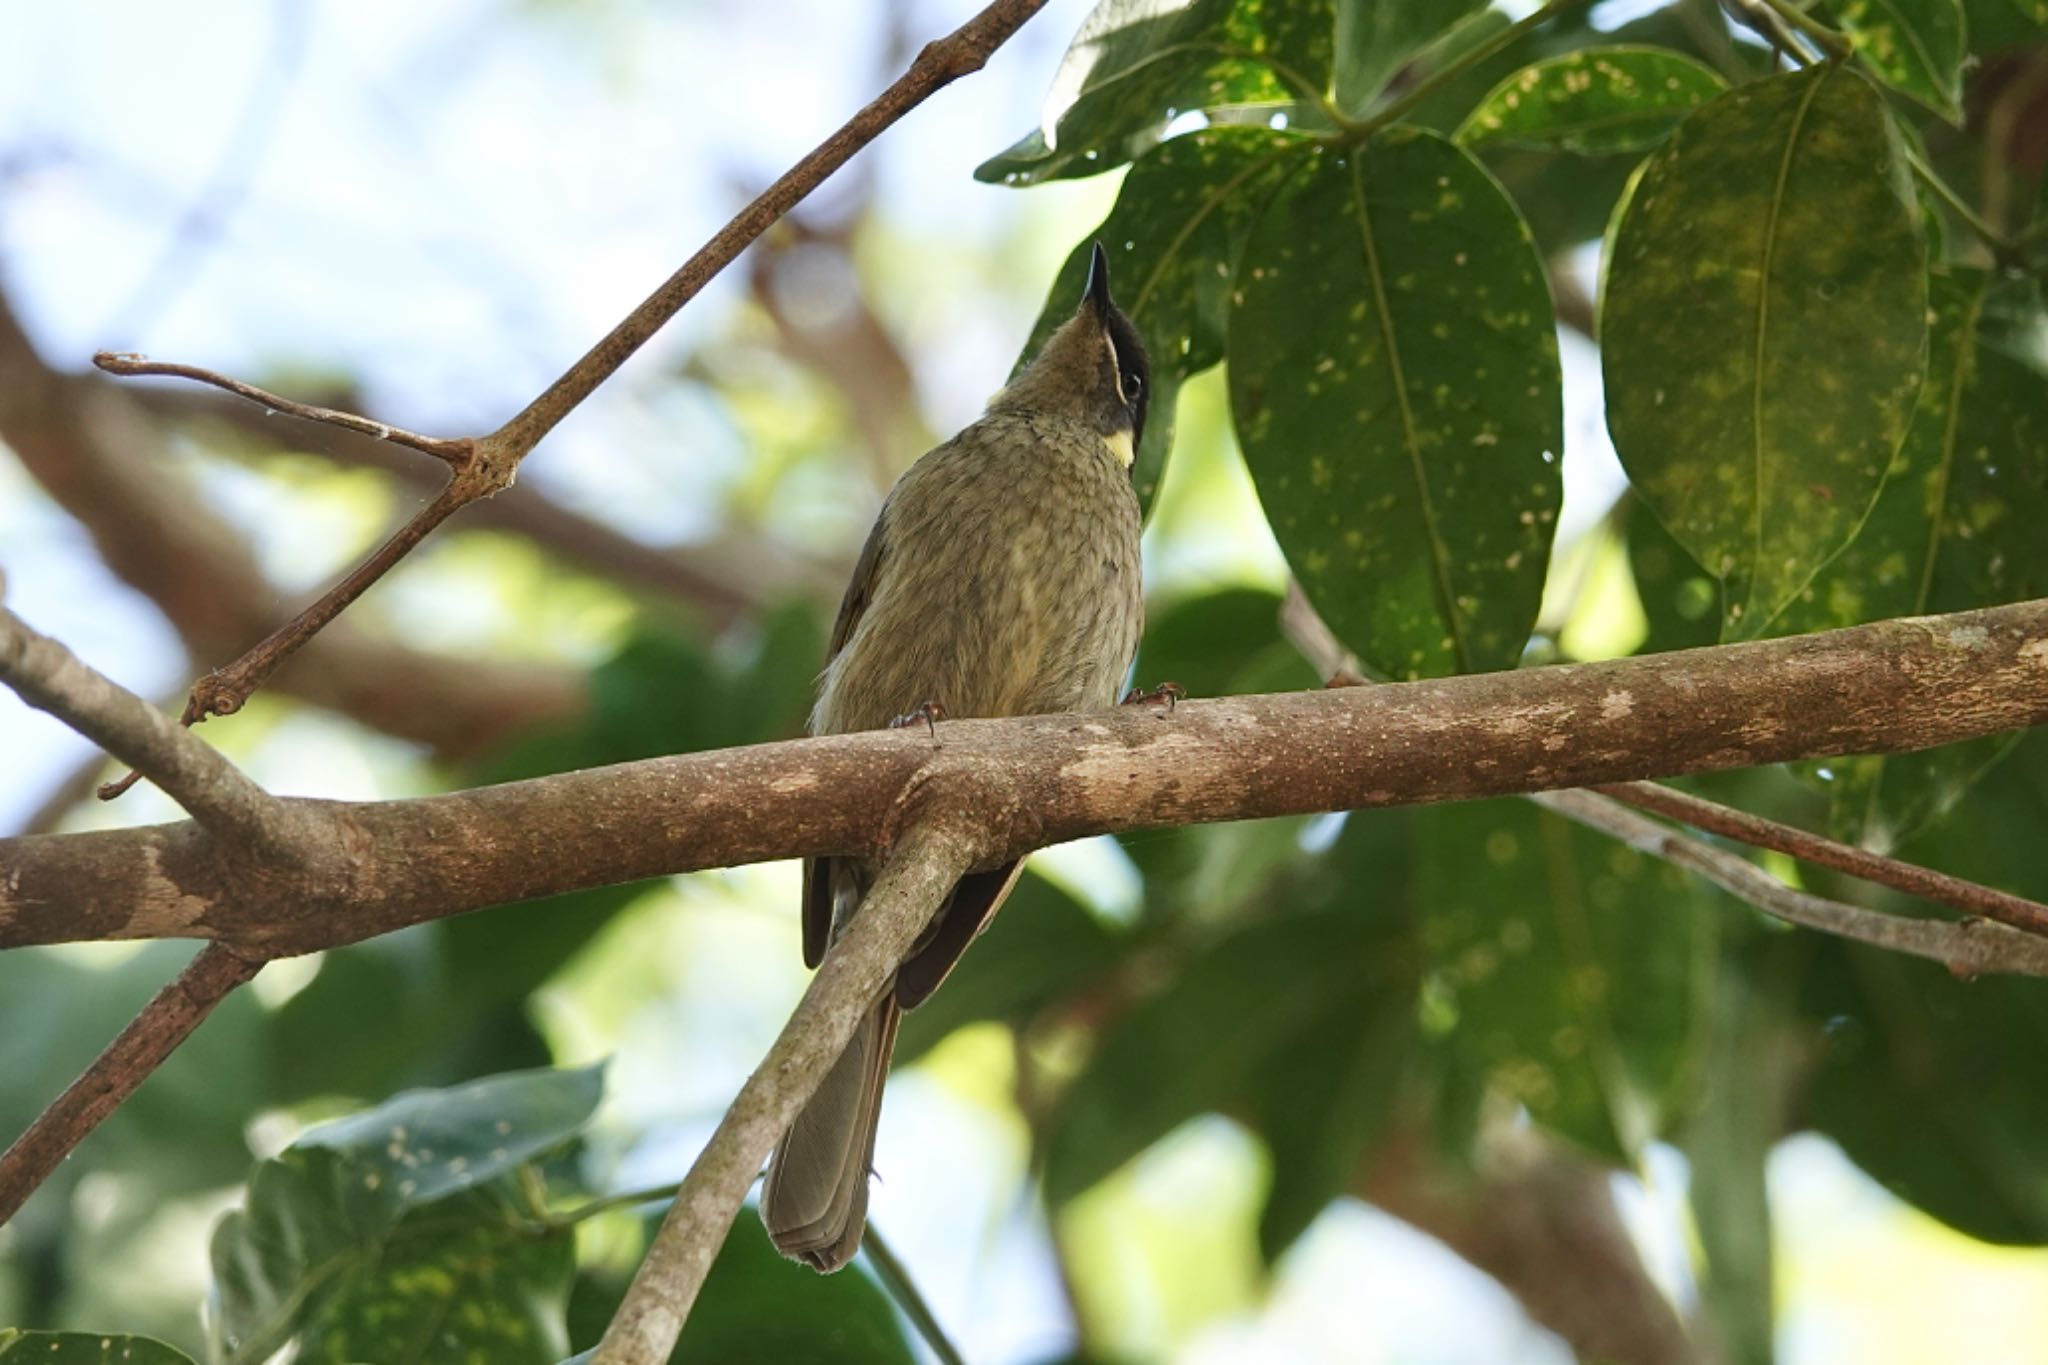 Photo of Lewin's Honeyeater at Hasties Swamp National Park by のどか